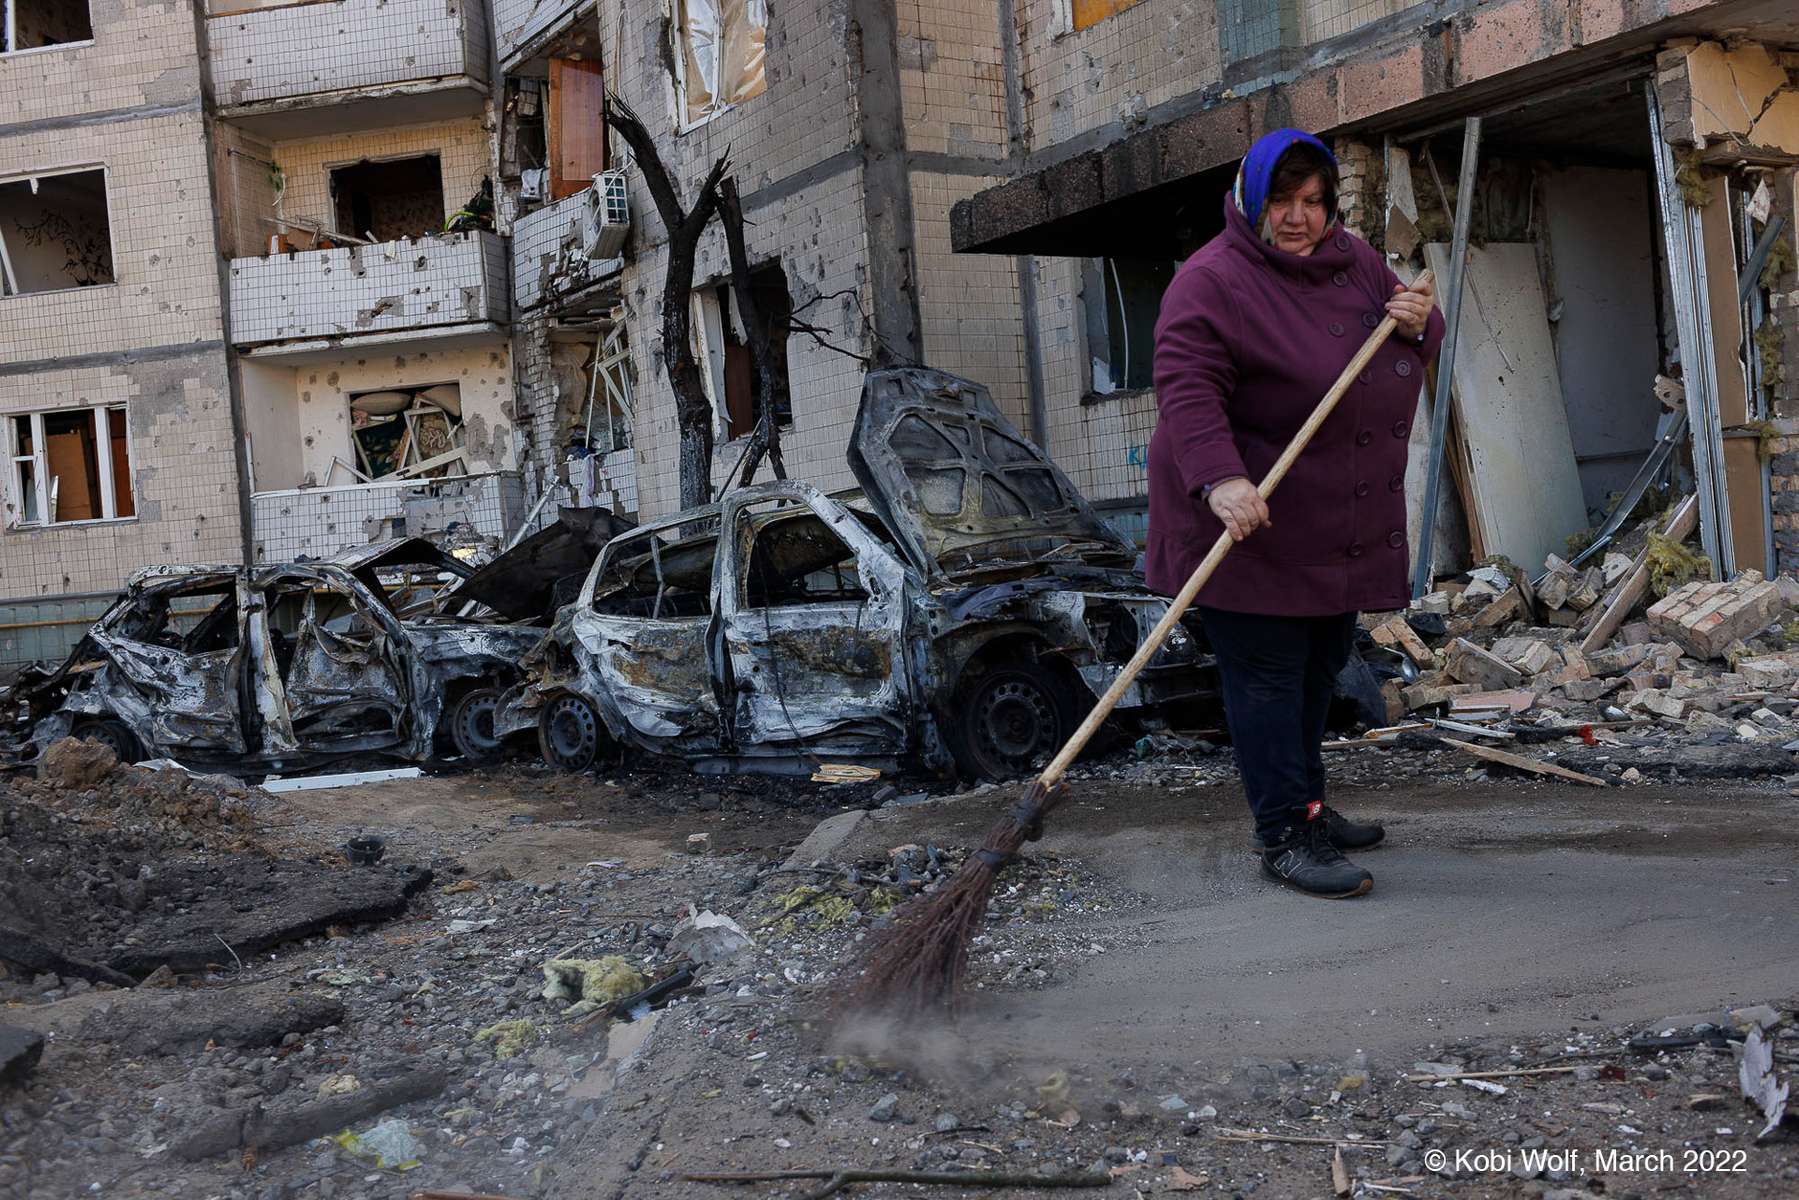 Woman clean around a damaged building  after air-attack by Russia In Kyiv, Ukraine  on March 21 2022  photographer: Kobi Wolf